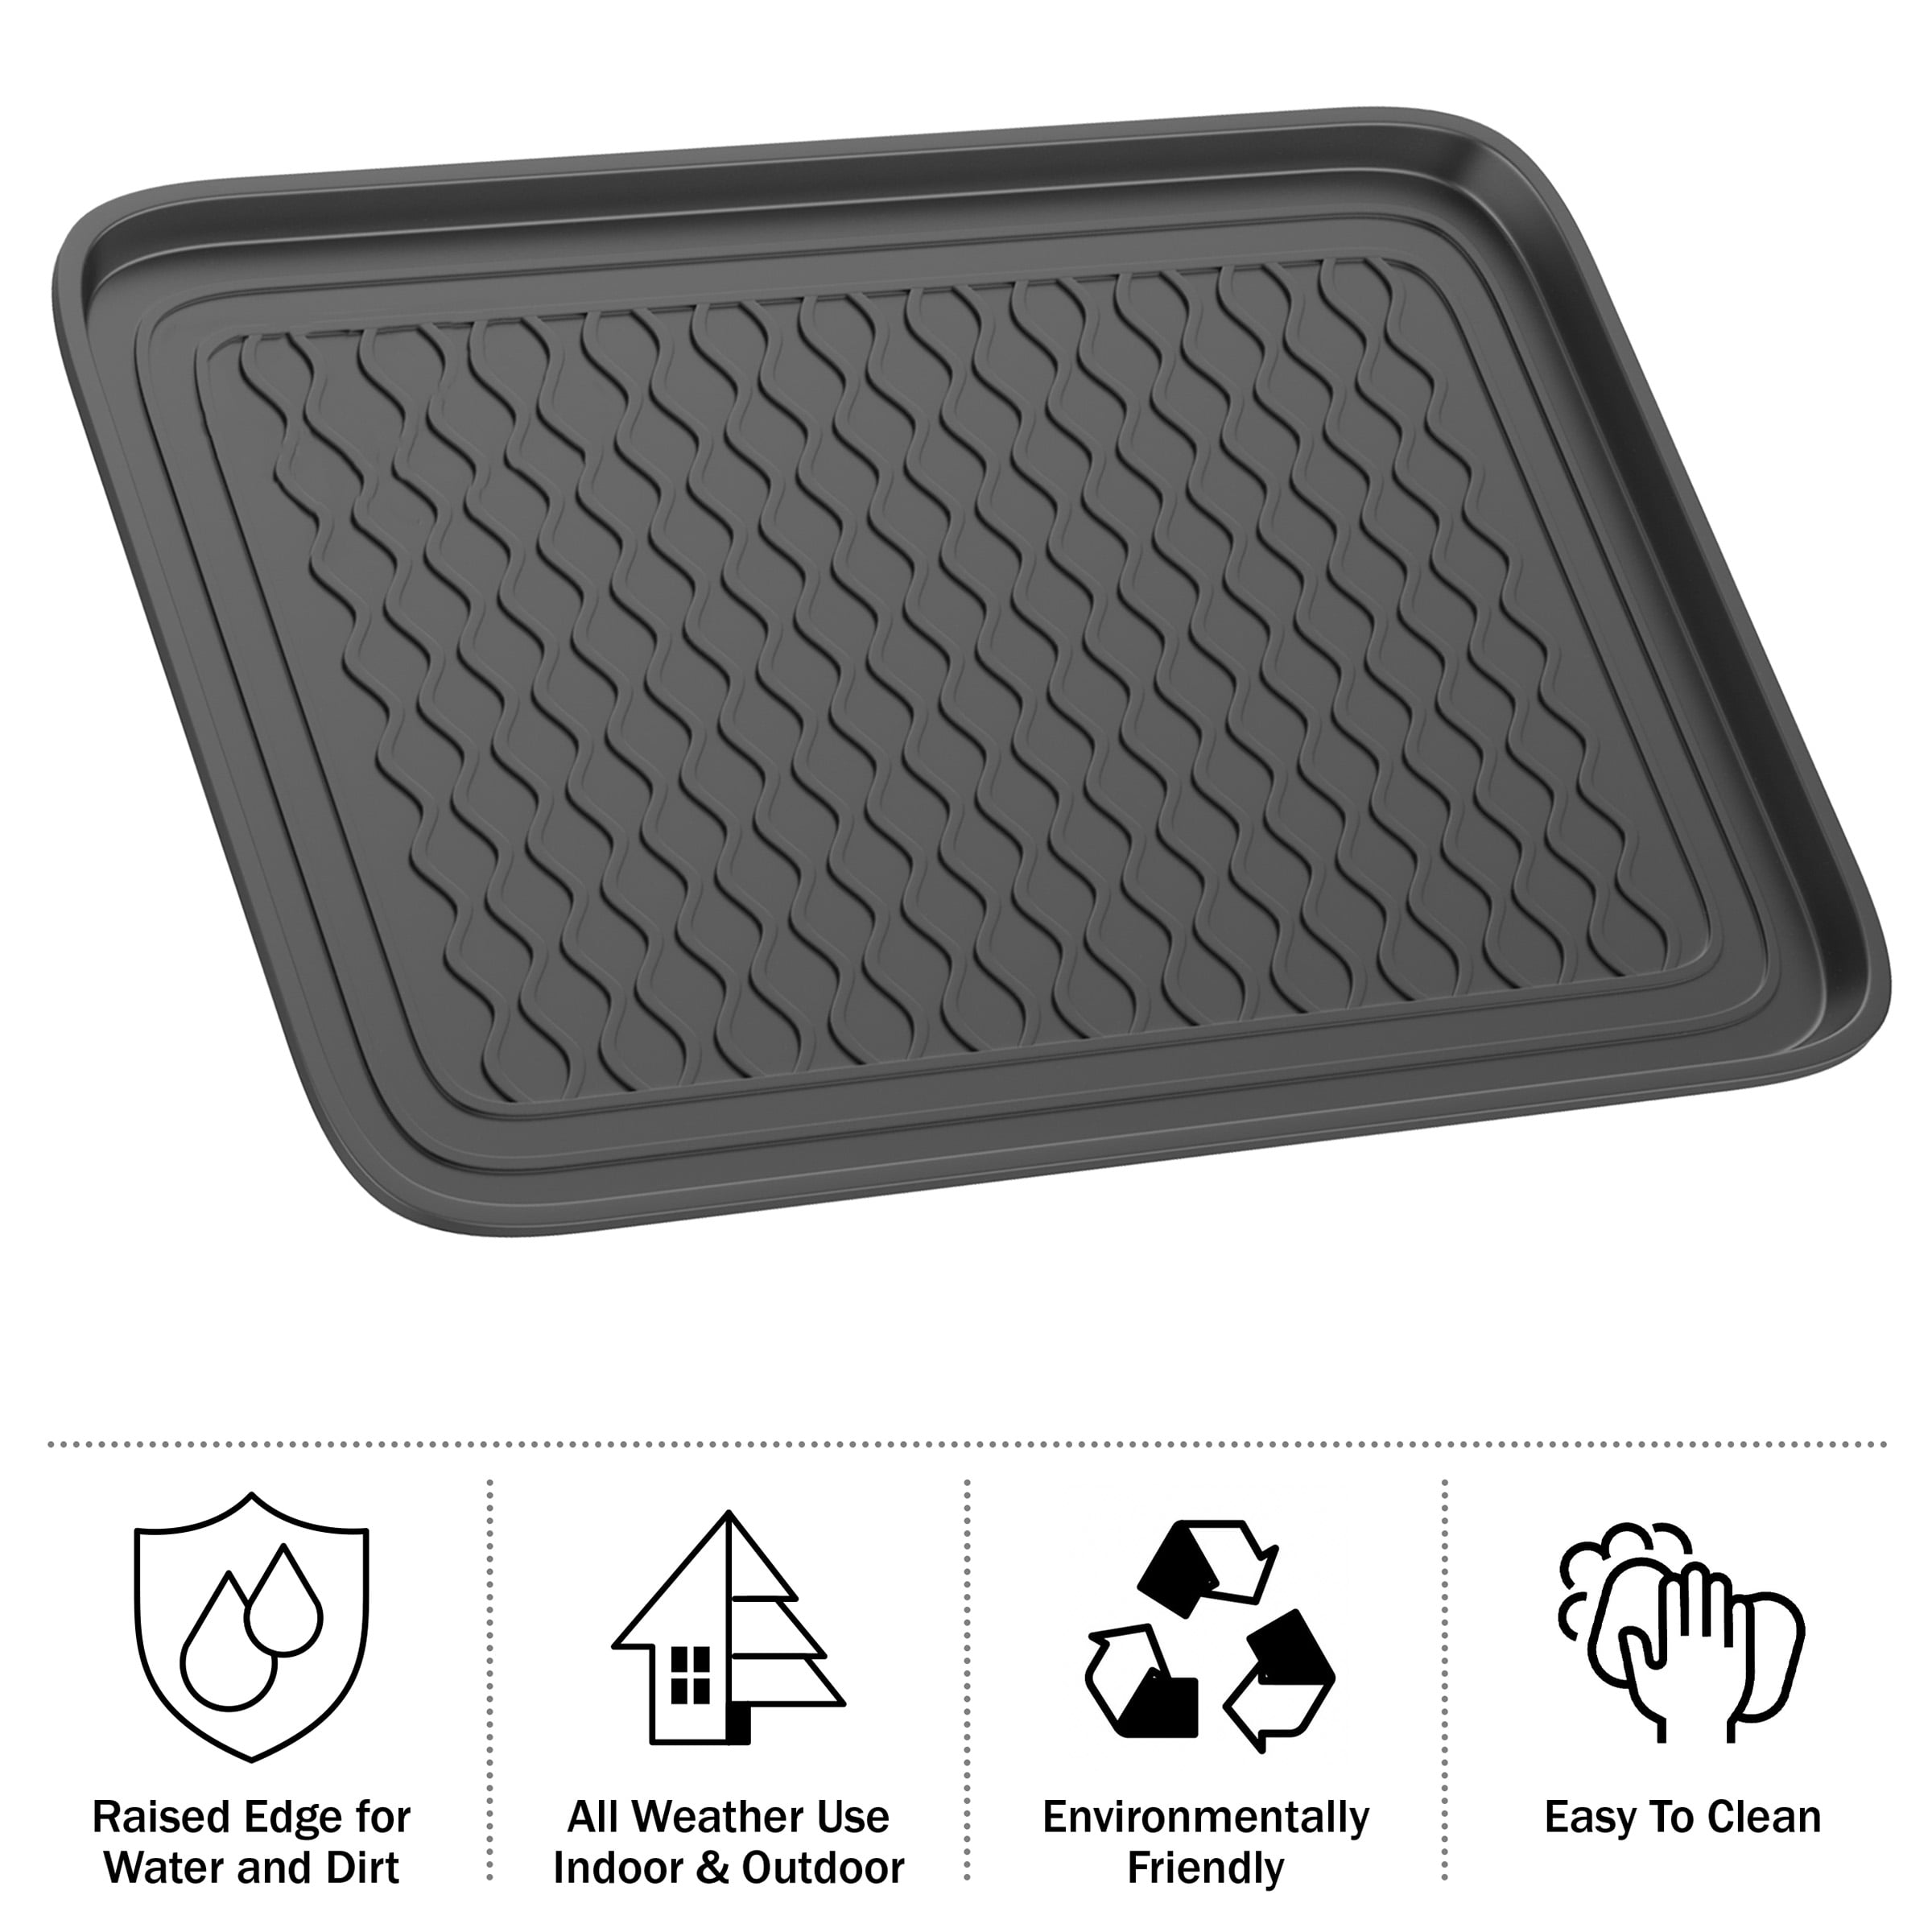 All Weather Boot Tray – Set of 2 Large Water-Resistant Plastic Utility Shoe  Mat for Indoor and Outdoor Use in All Seasons by Stalwart (Black)